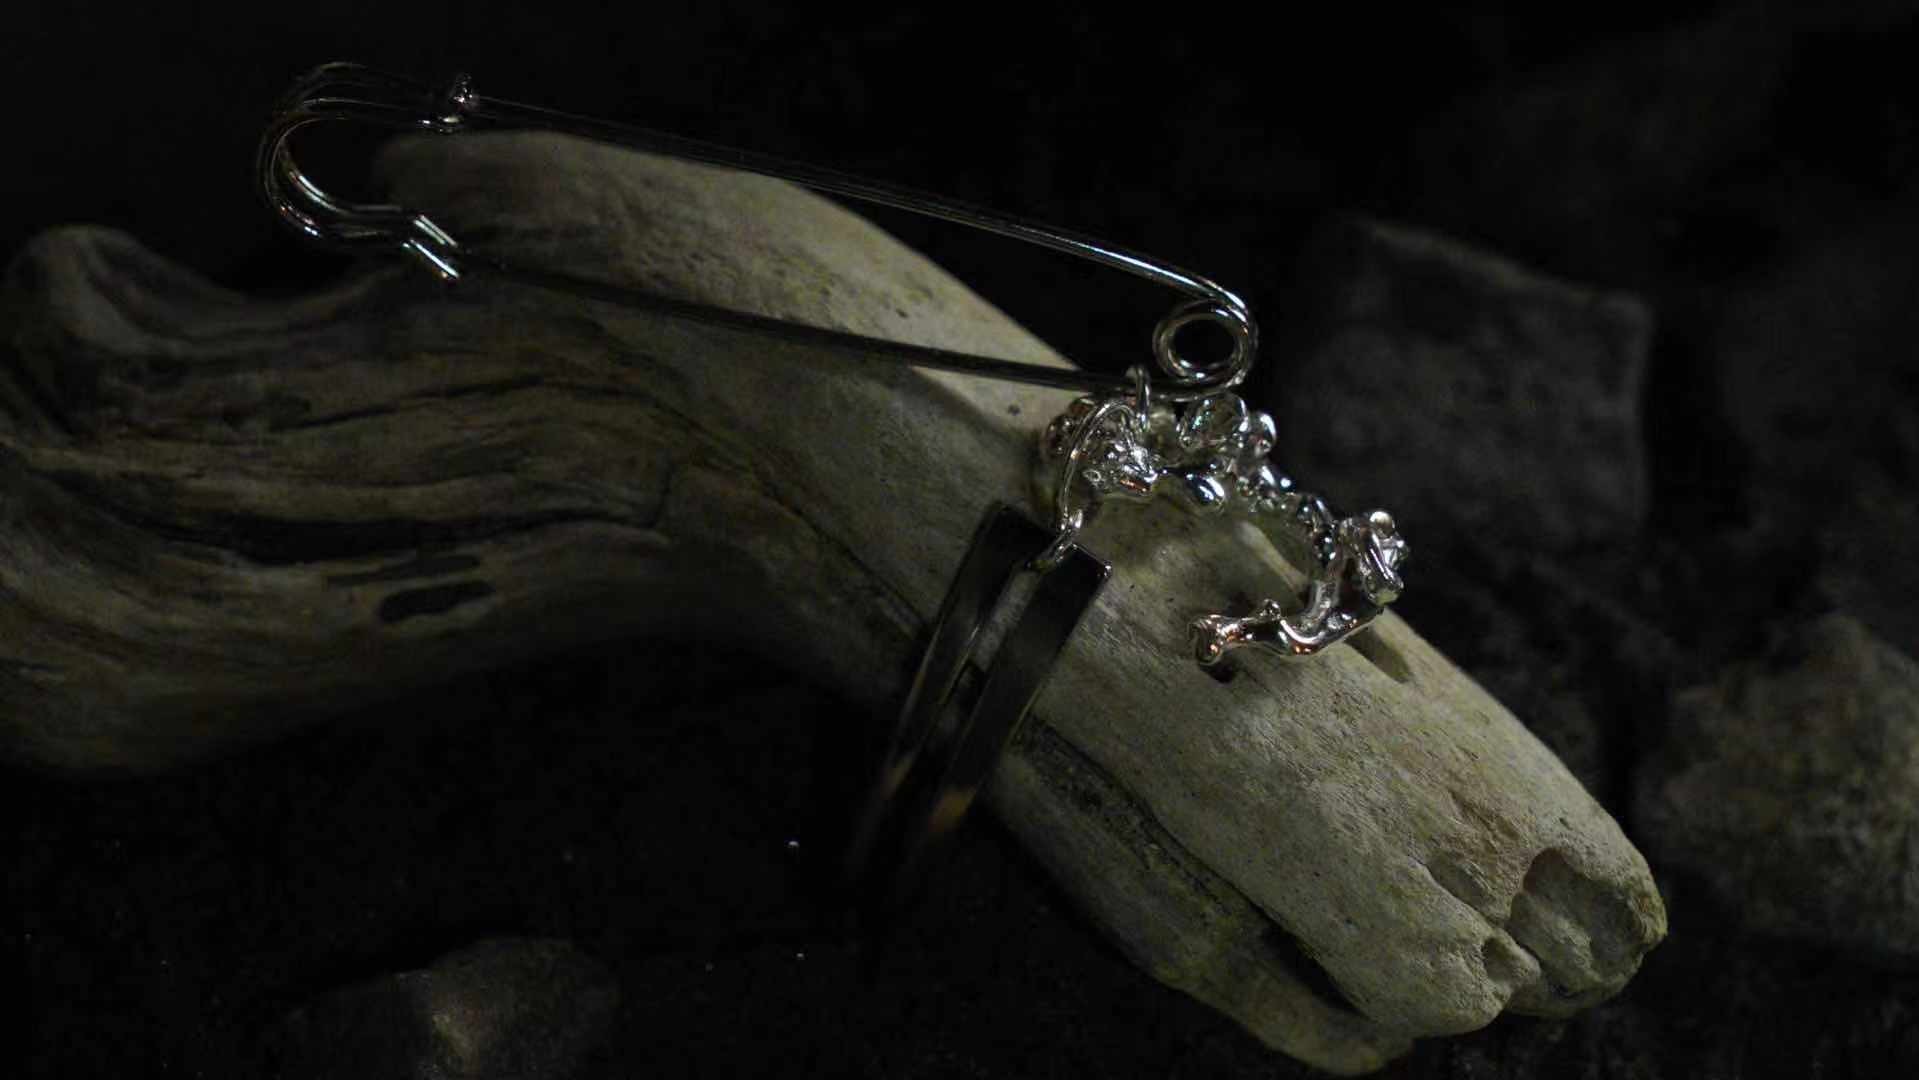 A safety pin with a free-form silver shape attached, which in turn is attached to a cuff that is wrapped around a piece of driftwood